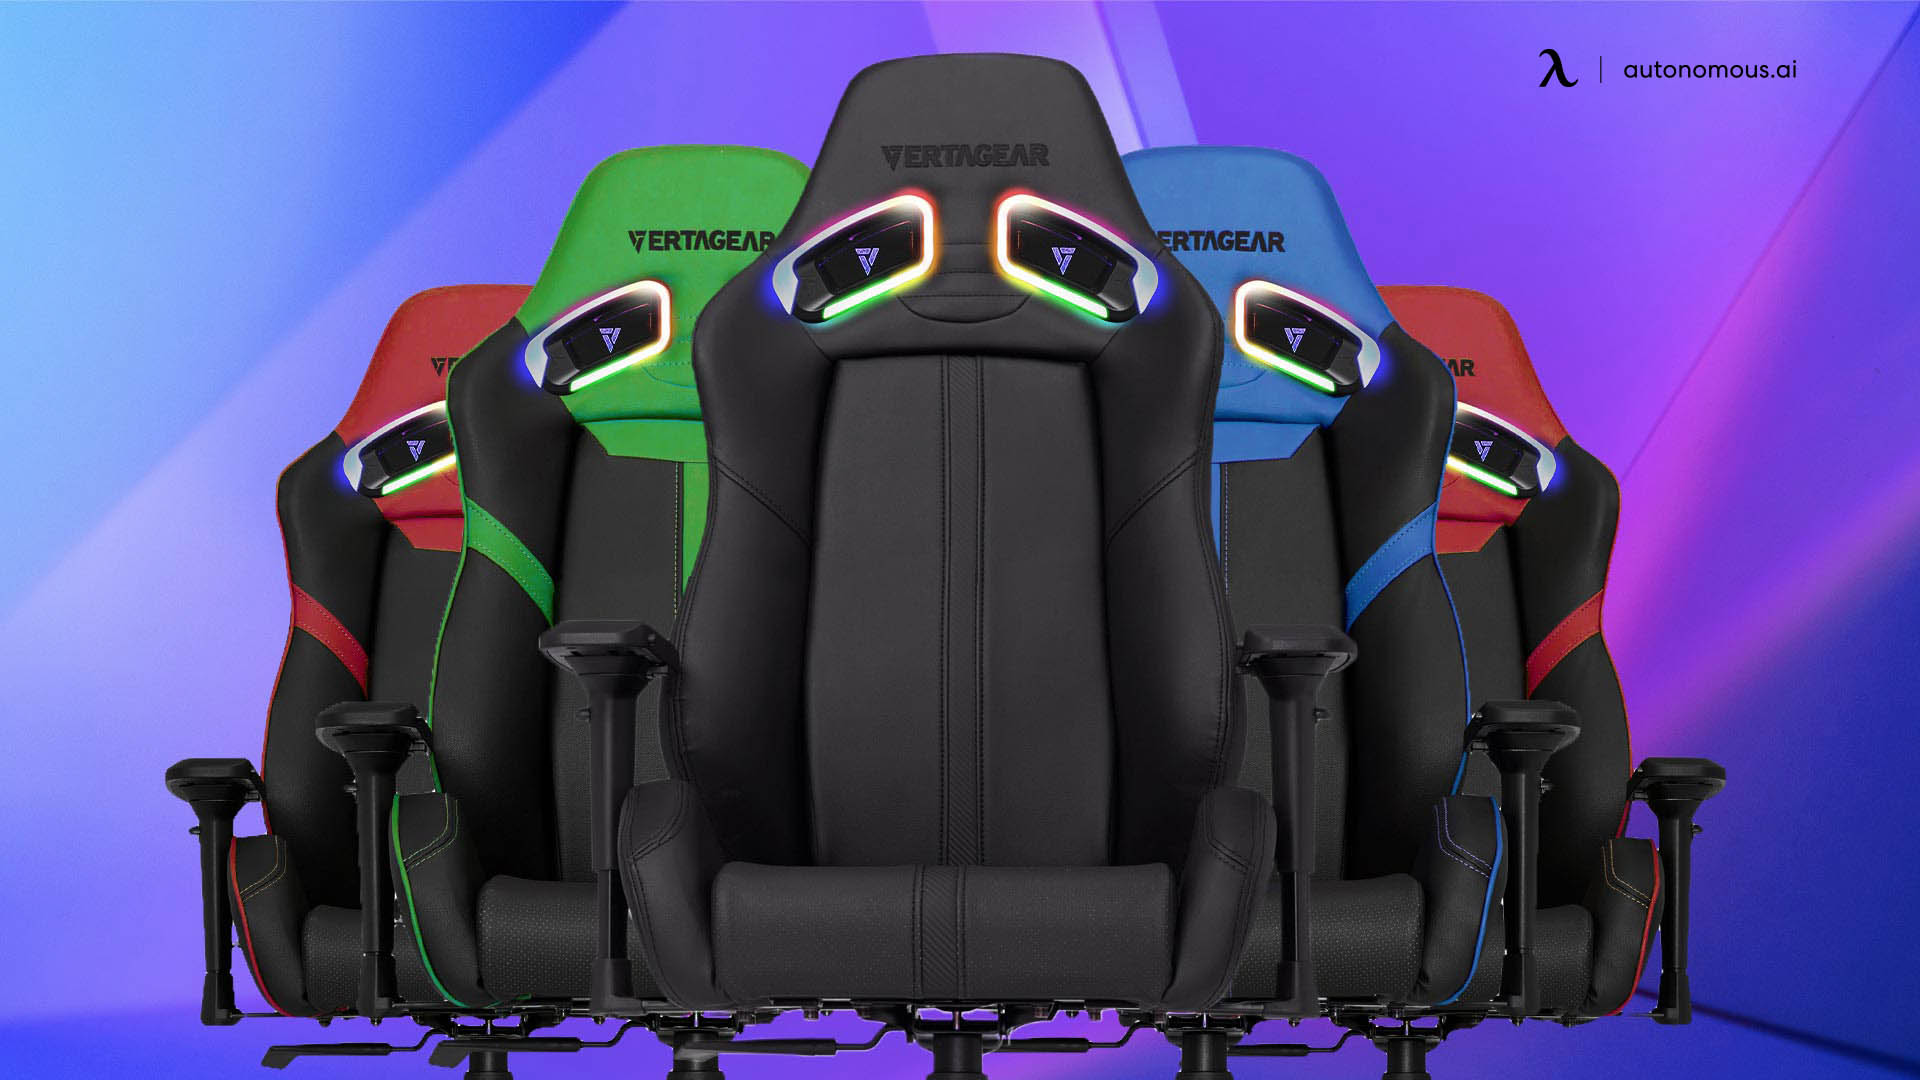 Overview of the Vertagear Gaming Chairs